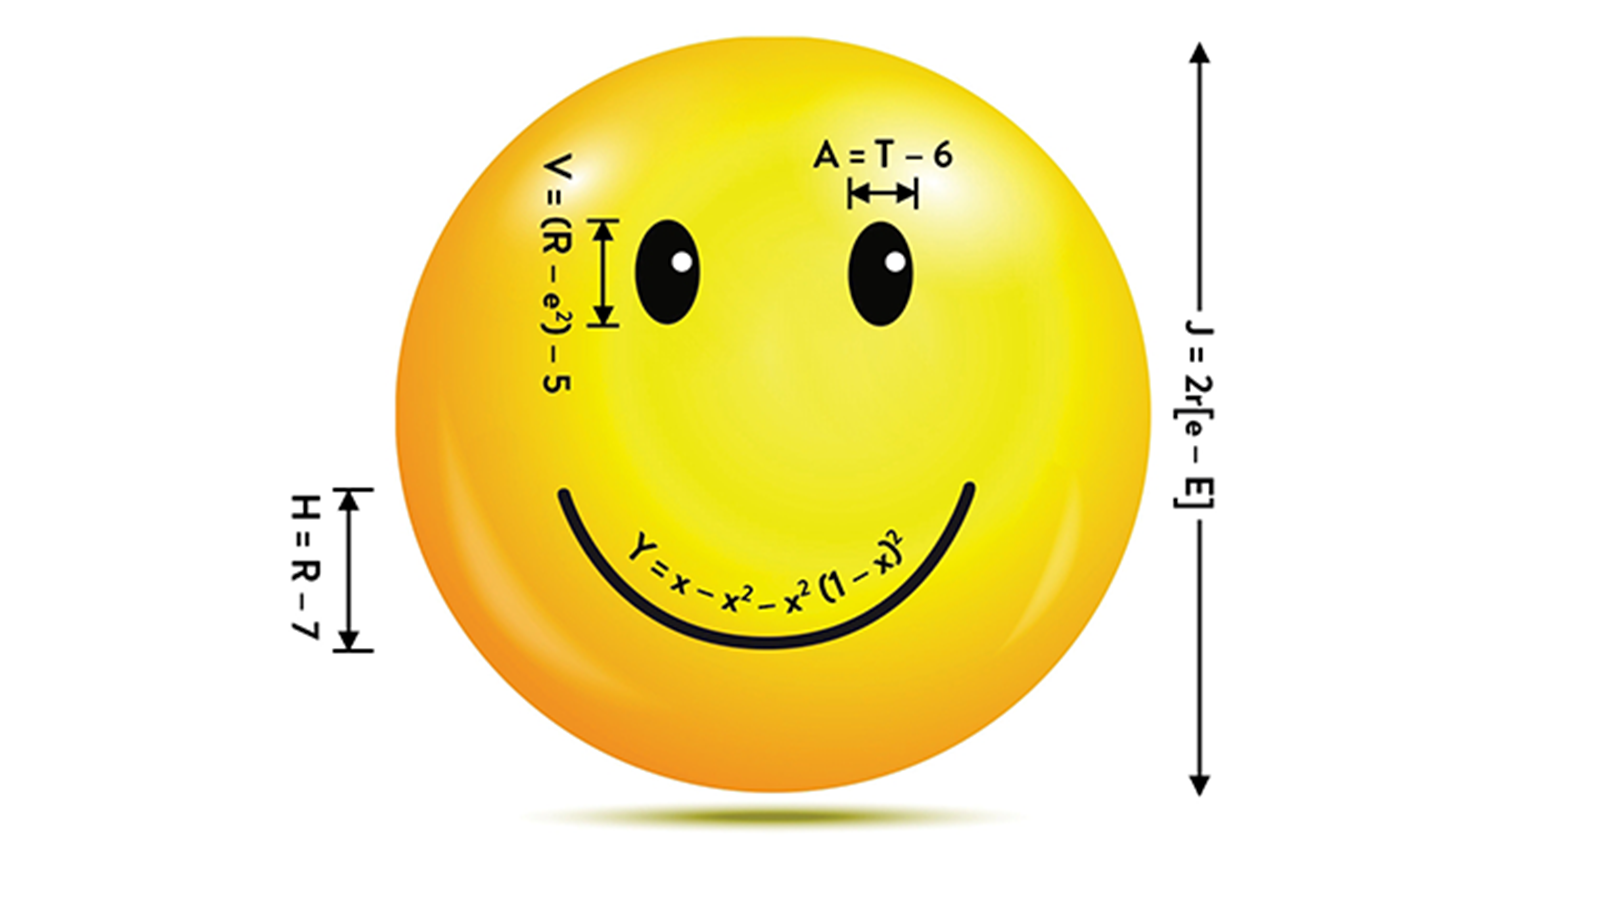 A yellow smiley face covered with equations and algorithms on a white background.